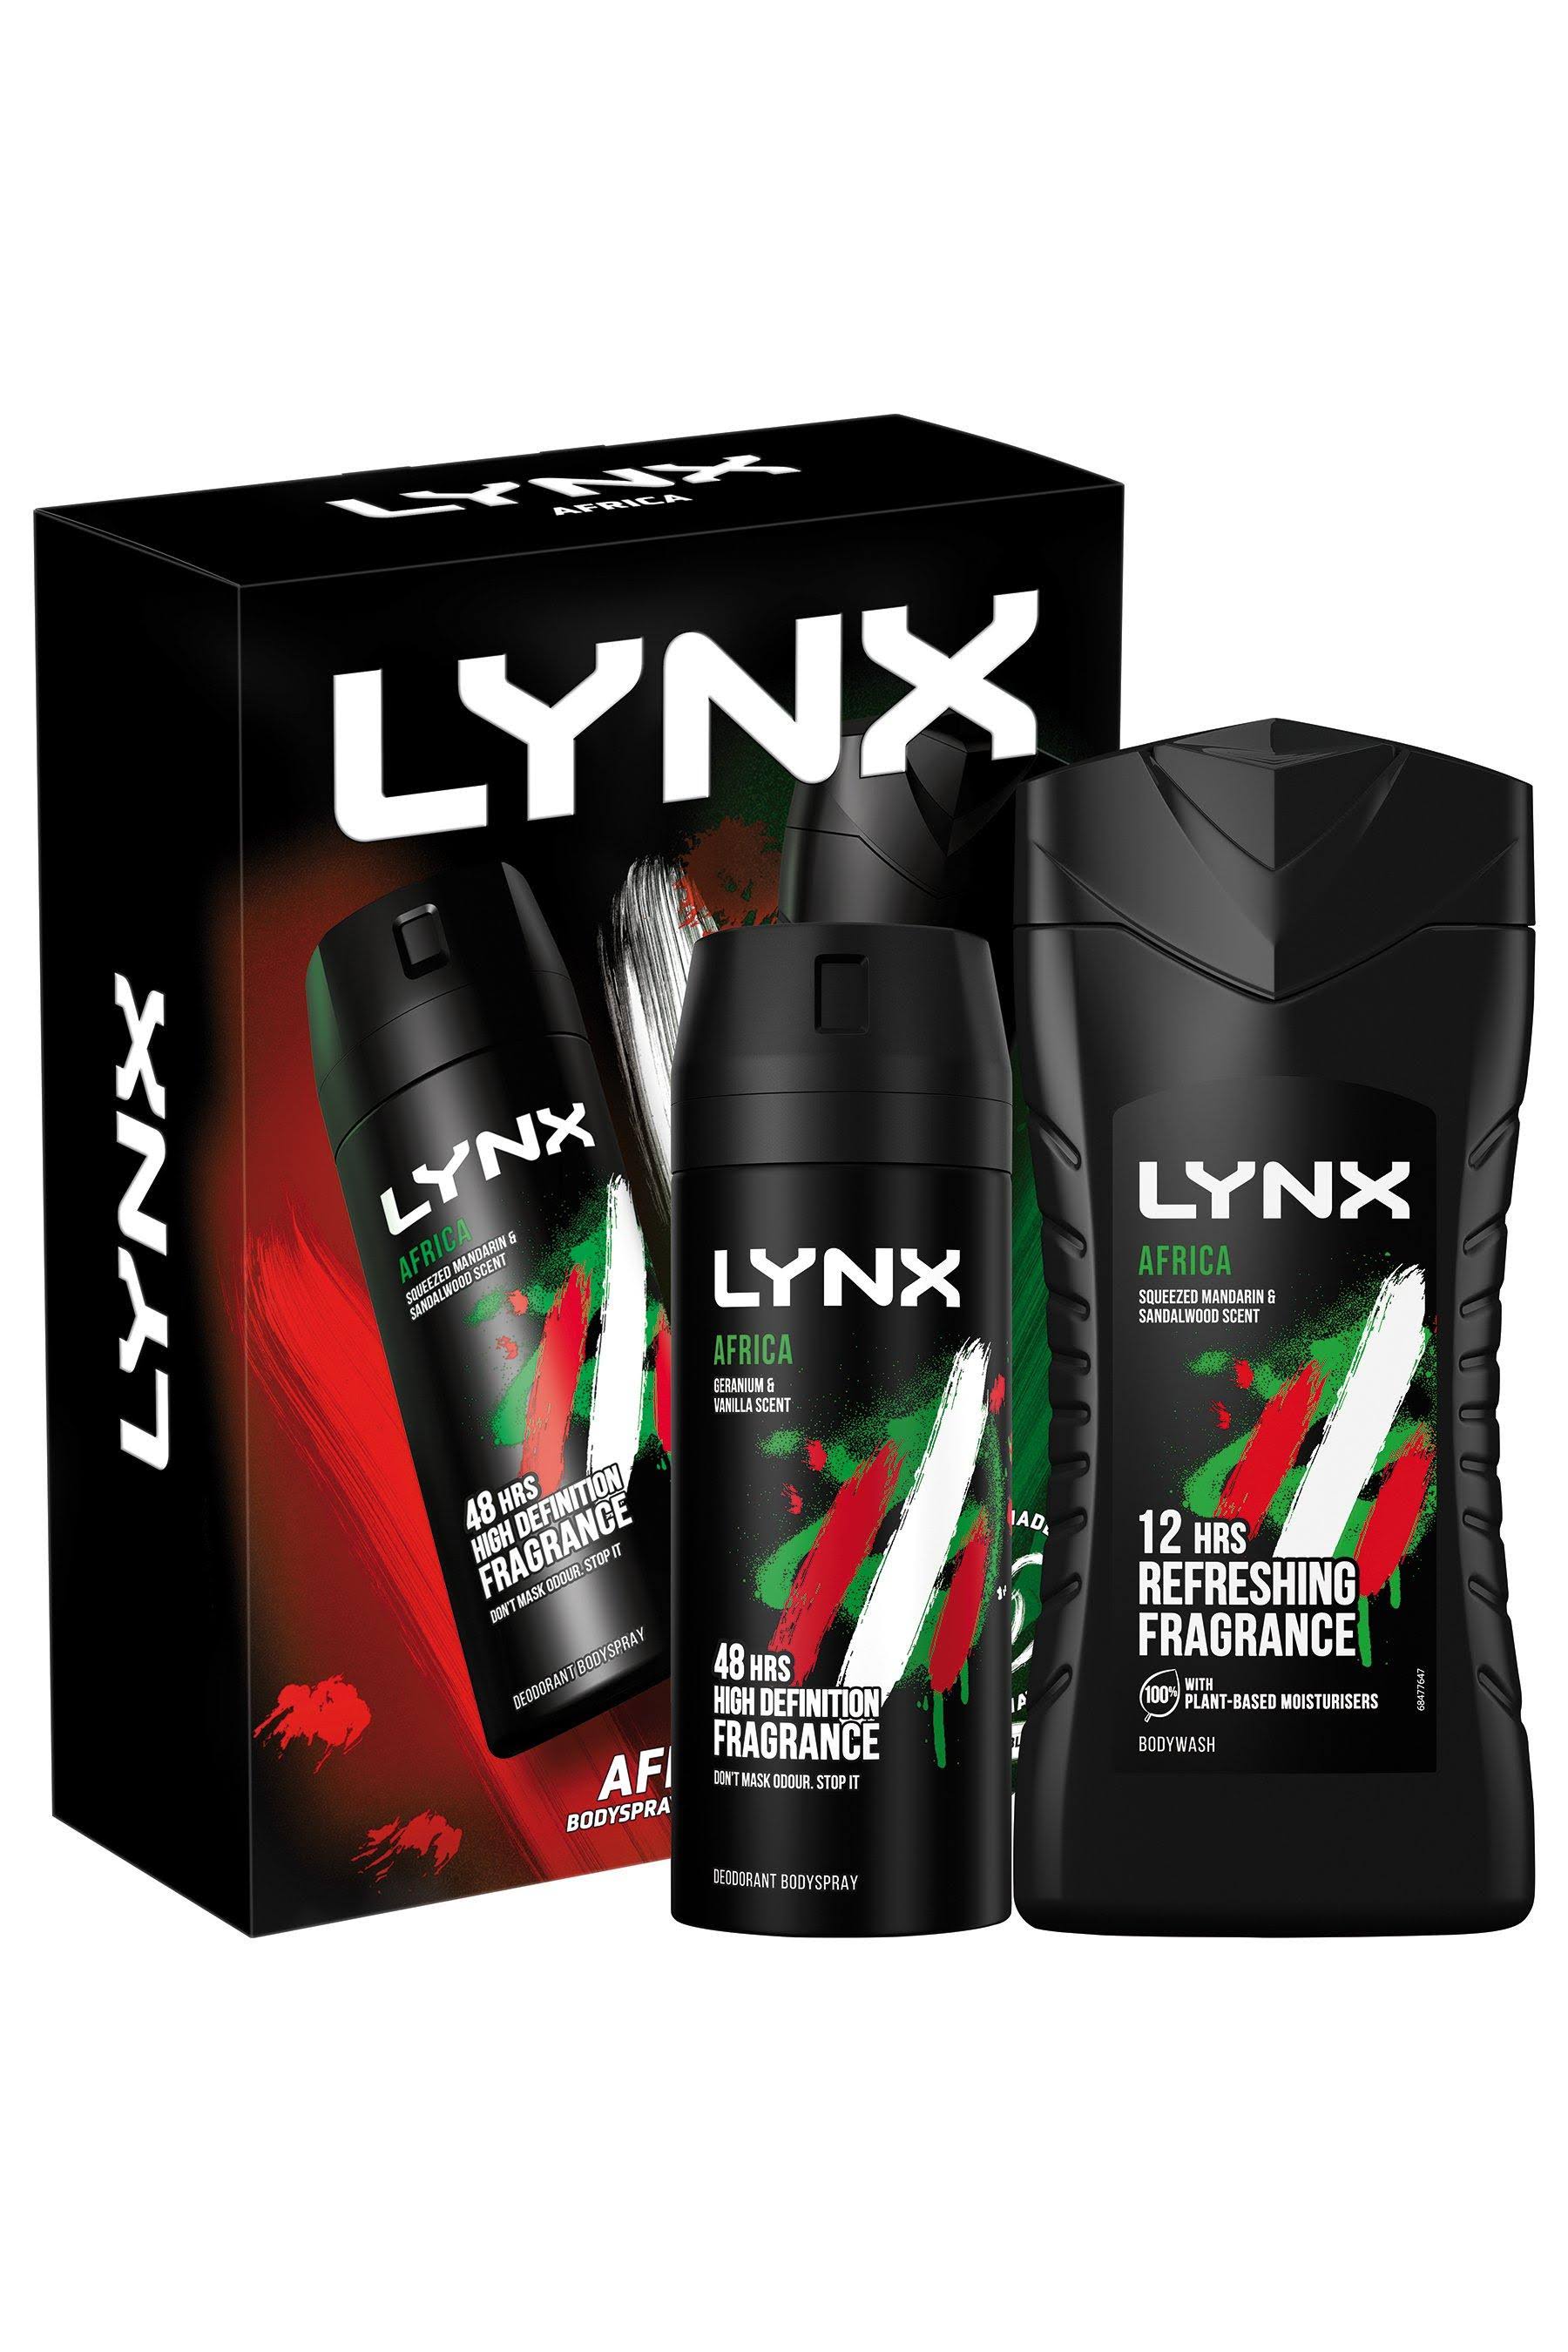 Lynx Africa Duo Gift Set by dpharmacy